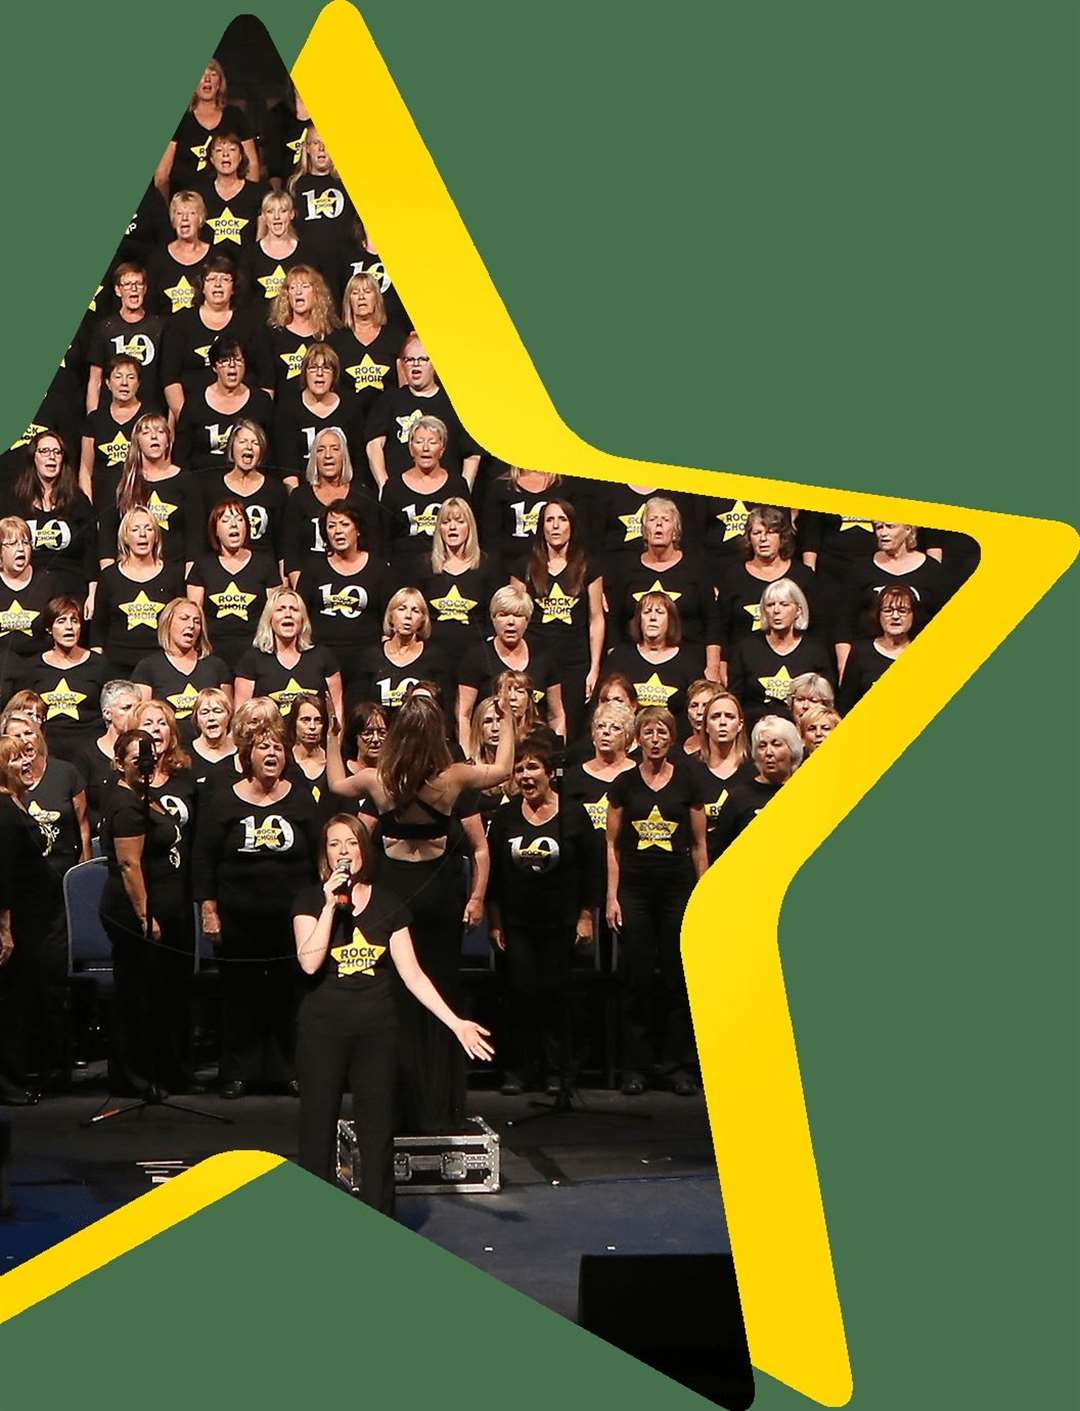 Rock Choir are inviting you for festive fun on Christmas Day at 9.30am.